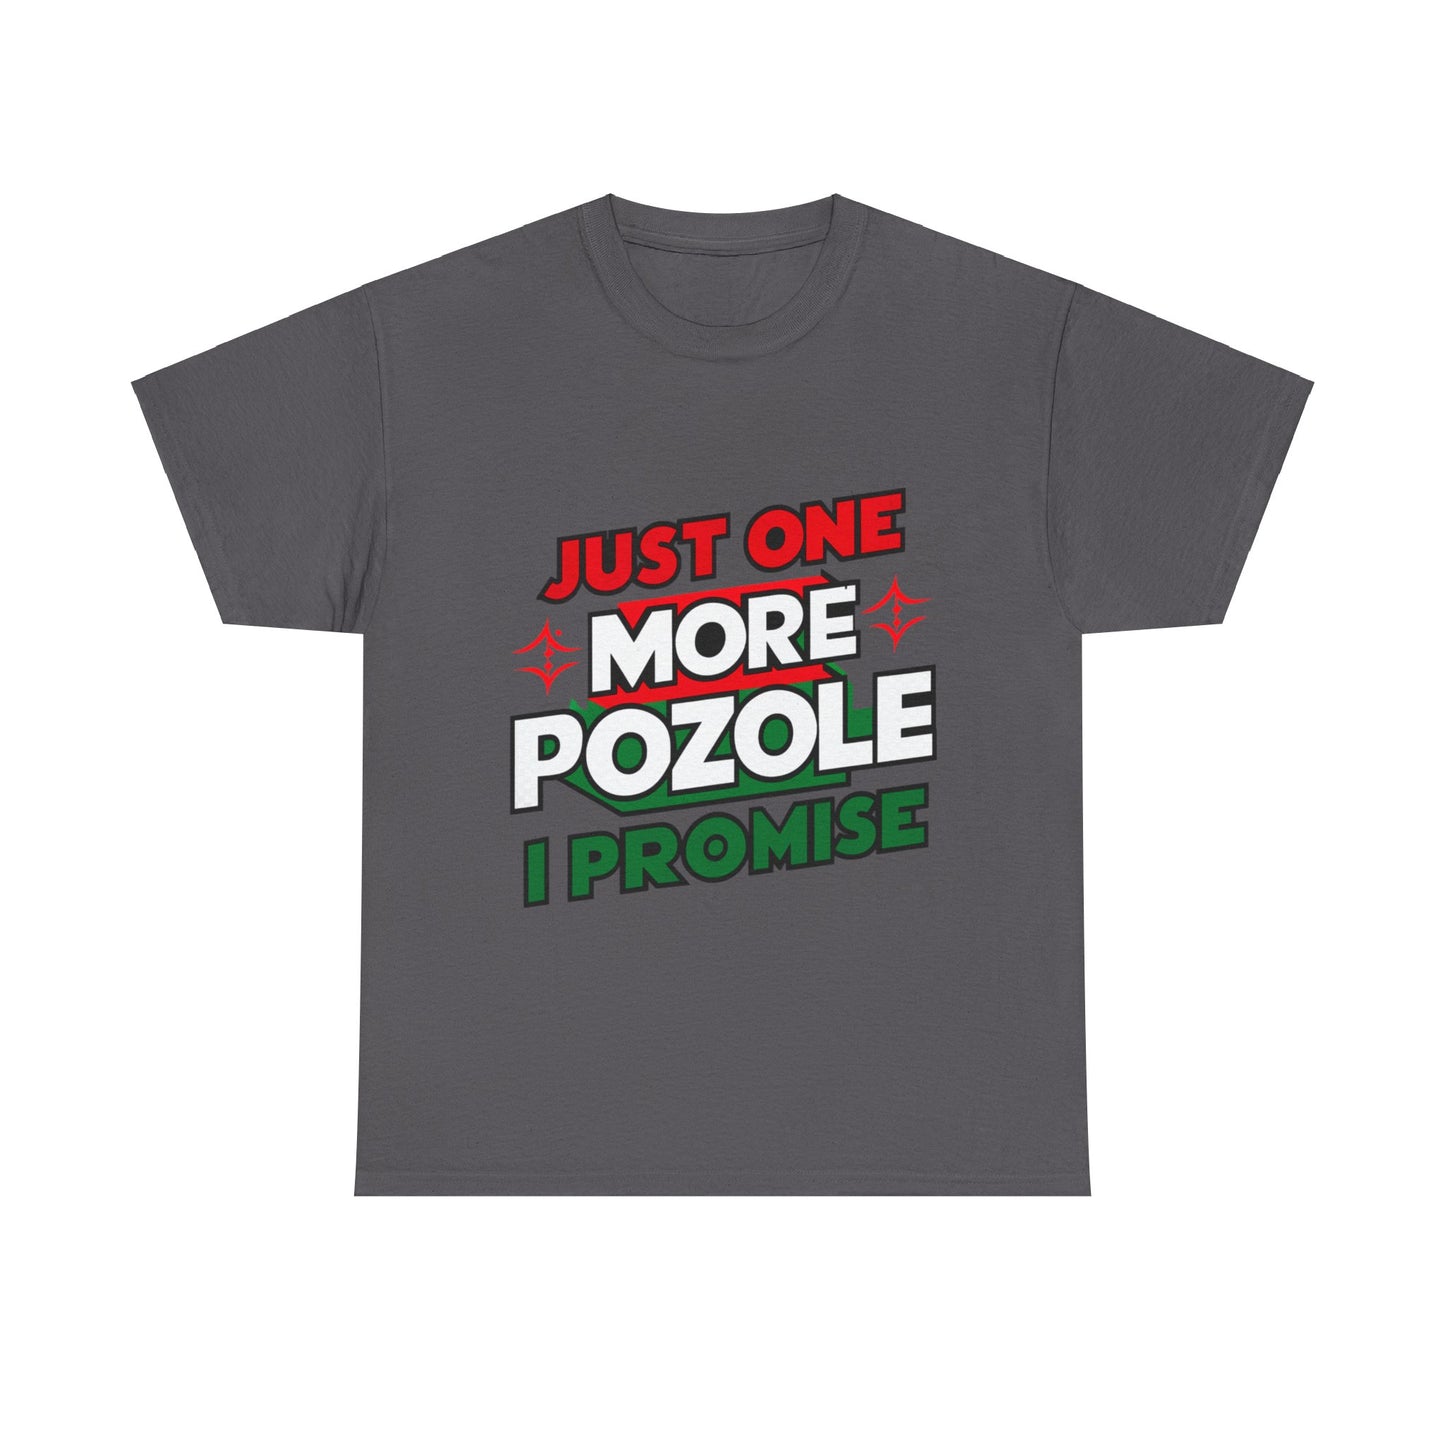 Just One More Pozole I Promise Mexican Food Graphic Unisex Heavy Cotton Tee Cotton Funny Humorous Graphic Soft Premium Unisex Men Women Charcoal T-shirt Birthday Gift-2